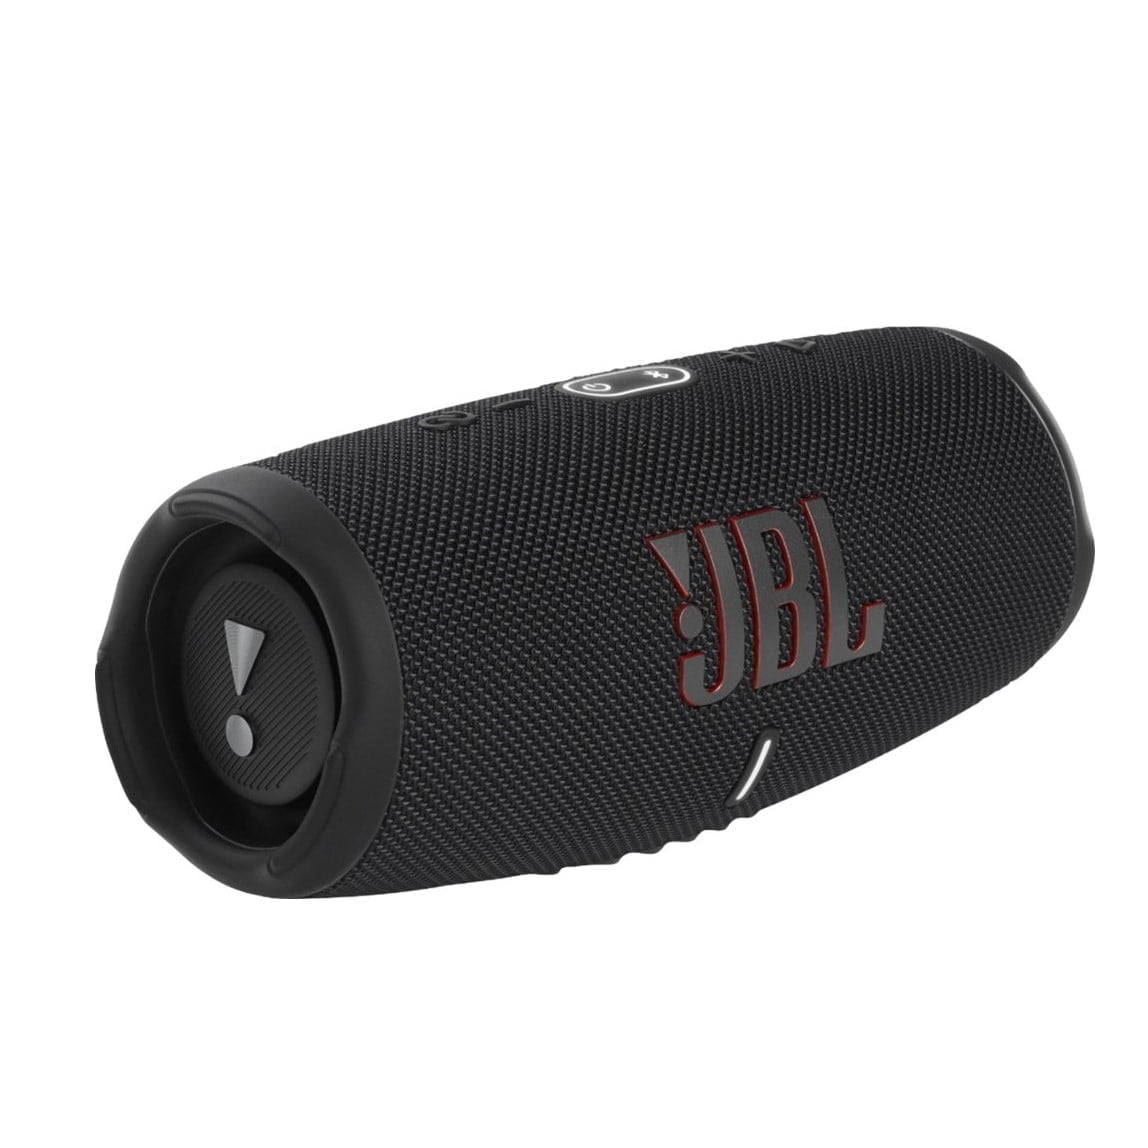 6454256 Rd Jbl &Amp;Lt;H1&Amp;Gt;Jbl - Charge5 Portable Waterproof Speaker With Powerbank - Black&Amp;Lt;/H1&Amp;Gt; Https://Www.youtube.com/Watch?V=Fn2W7C7Snr8 Play And Charge Endlessly. Take The Party With You No Matter What The Weather. The Jbl Charge 5 Speaker Delivers Bold Jbl Original Pro Sound, With Its Optimized Long Excursion Driver, Separate Tweeter And Dual Pumping Jbl Bass Radiators. Up To 20 Hours Of Playtime And A Handy Powerbank To Keep Your Devices Charged To Keep The Party Going All Night. Rain? Spilled Drinks? Beach Sand? The Ip67 Waterproof And Dustproof Charge 5 Survives Whatever Comes Its Way. Thanks To Partyboost, You Can Connect Multiple Jbl Partyboost-Enabled Speakers For A Sound Big Enough For Any Crowd. With All-New Colors Inspired By The Latest Street Fashion Trends, It Looks As Great As It Sounds. Jbl Speaker Jbl Charge 5 Portable Waterproof Speaker With Powerbank - Black